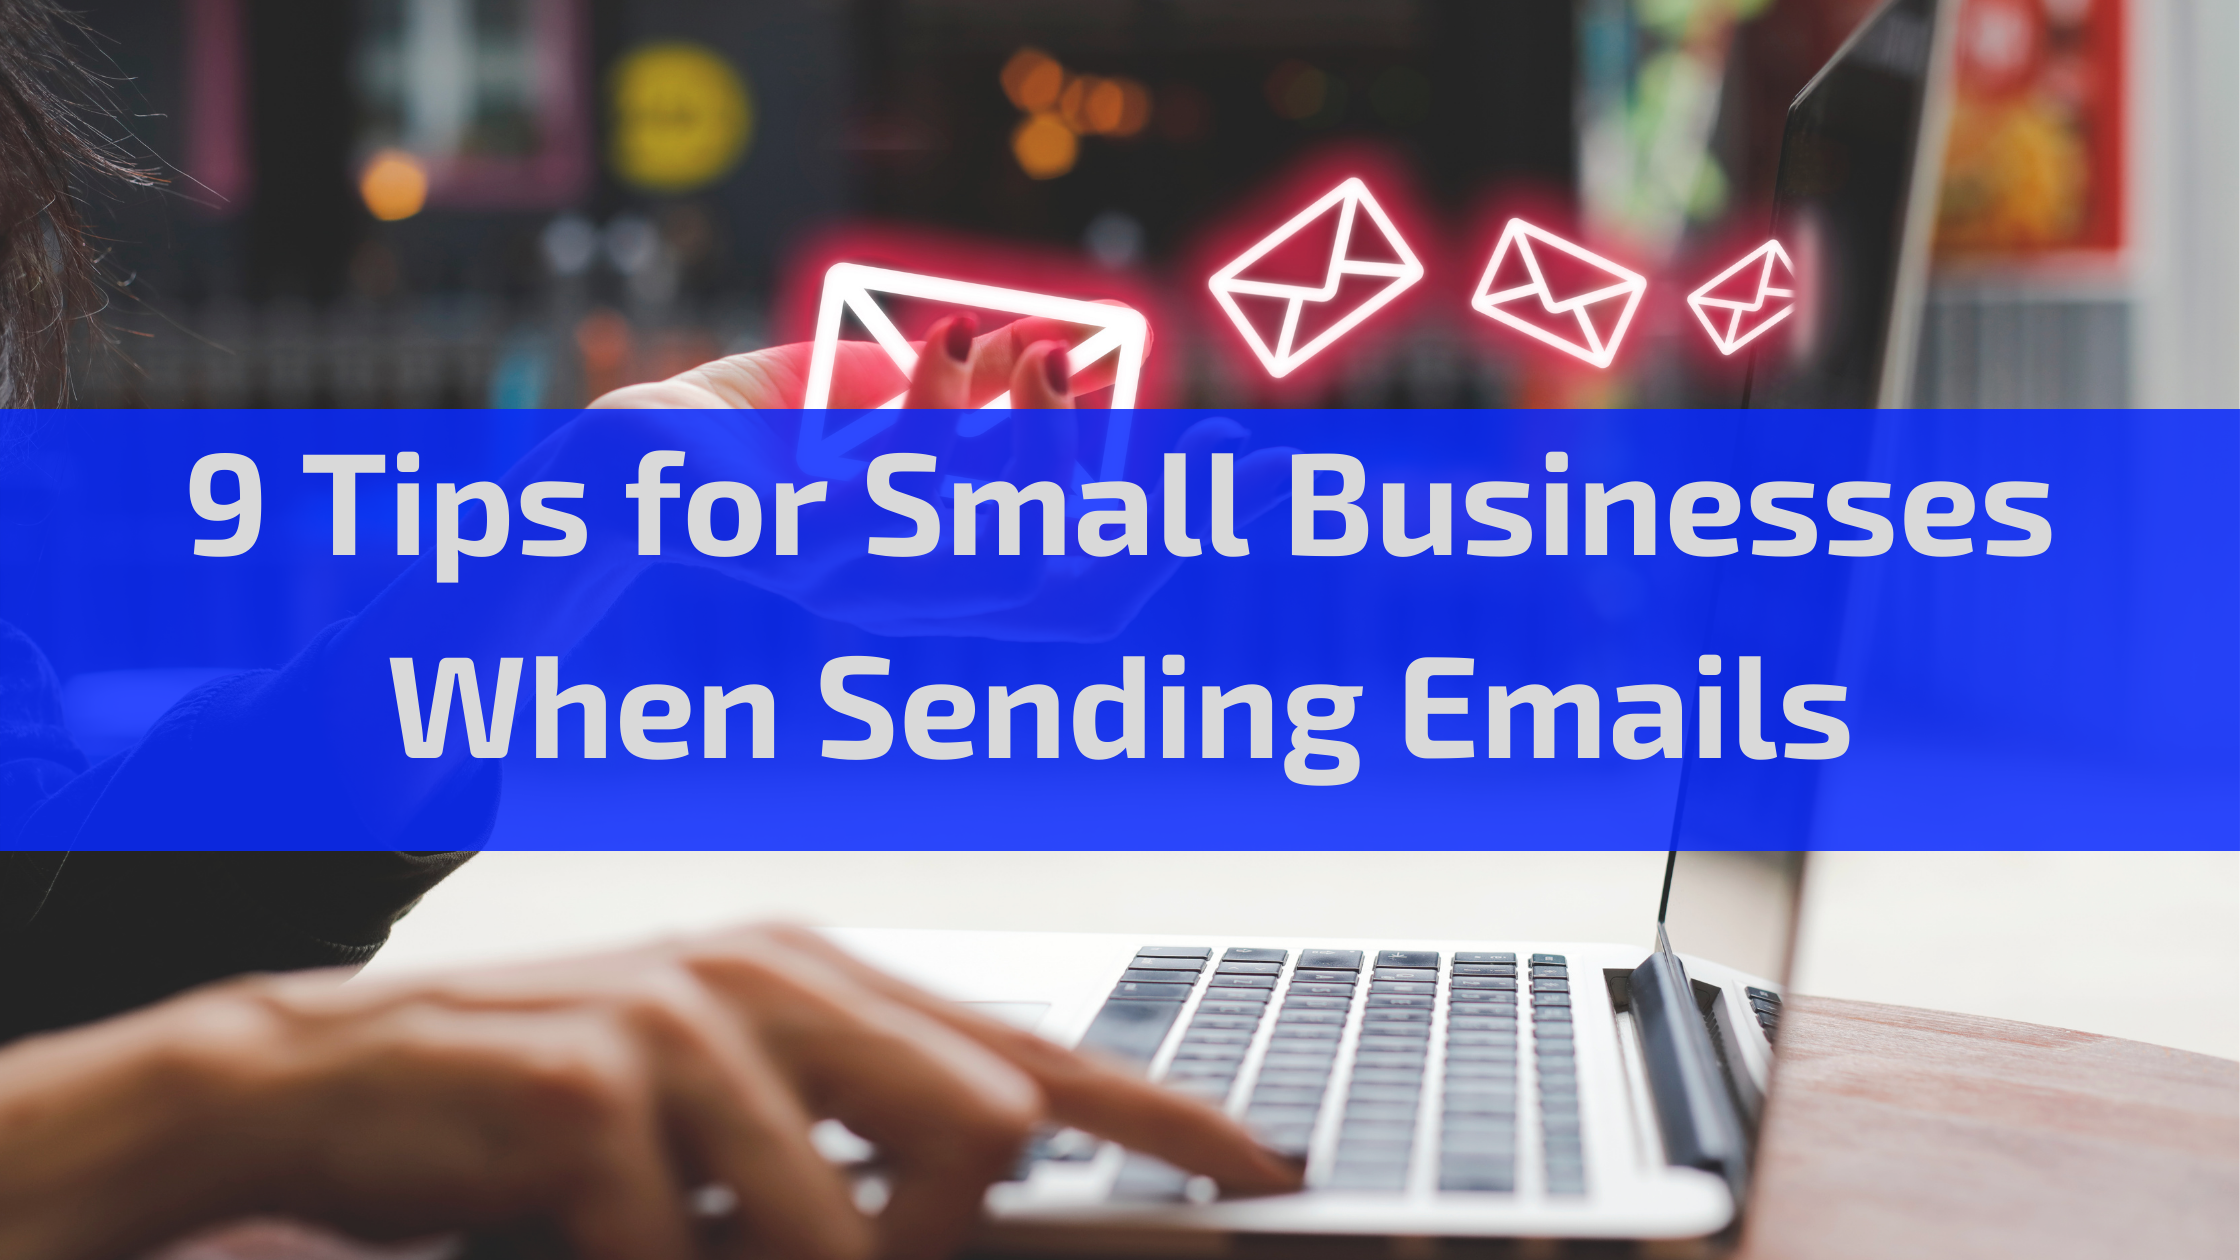 9 Tips for Small Businesses When Sending Emails